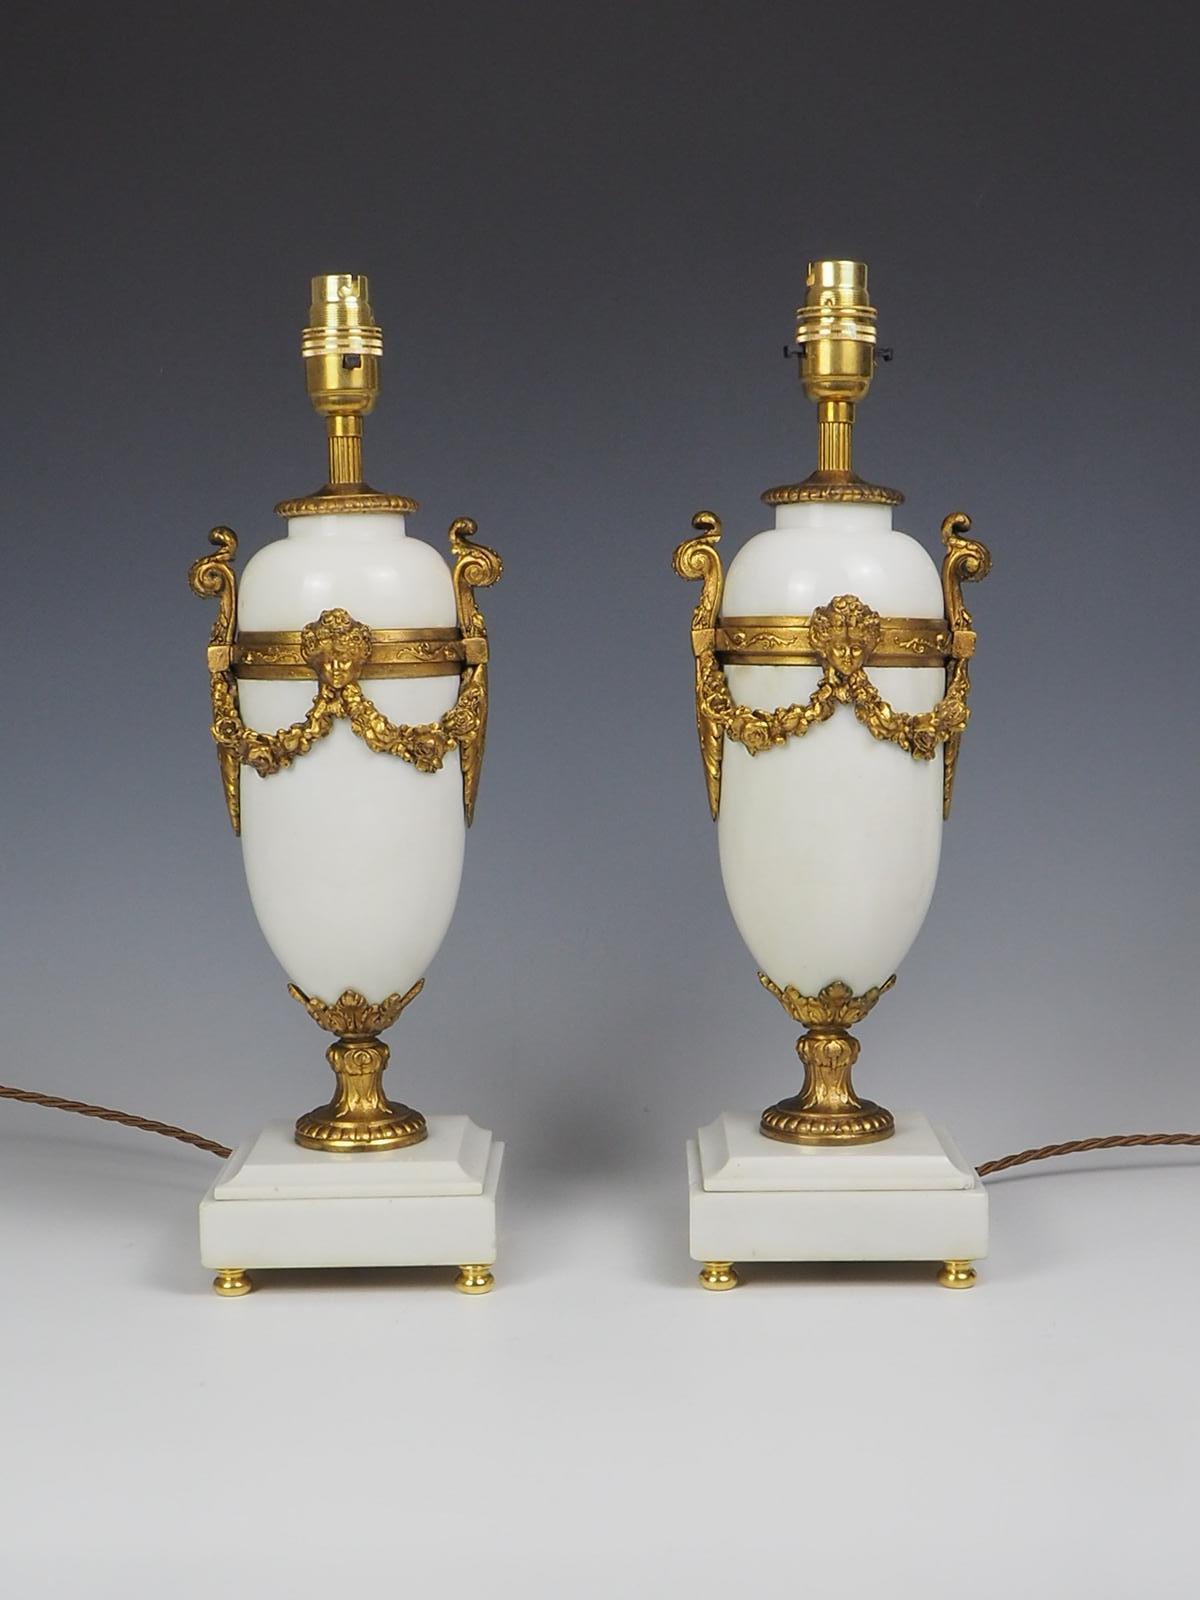 Exquisite pair of 19th Century French White Marble and Gilt Table Lamps exudes elegance and sophistication. The square white marble base with a flat back provides a stable foundation for the mantle shelf lamps, giving them a raised appearance on